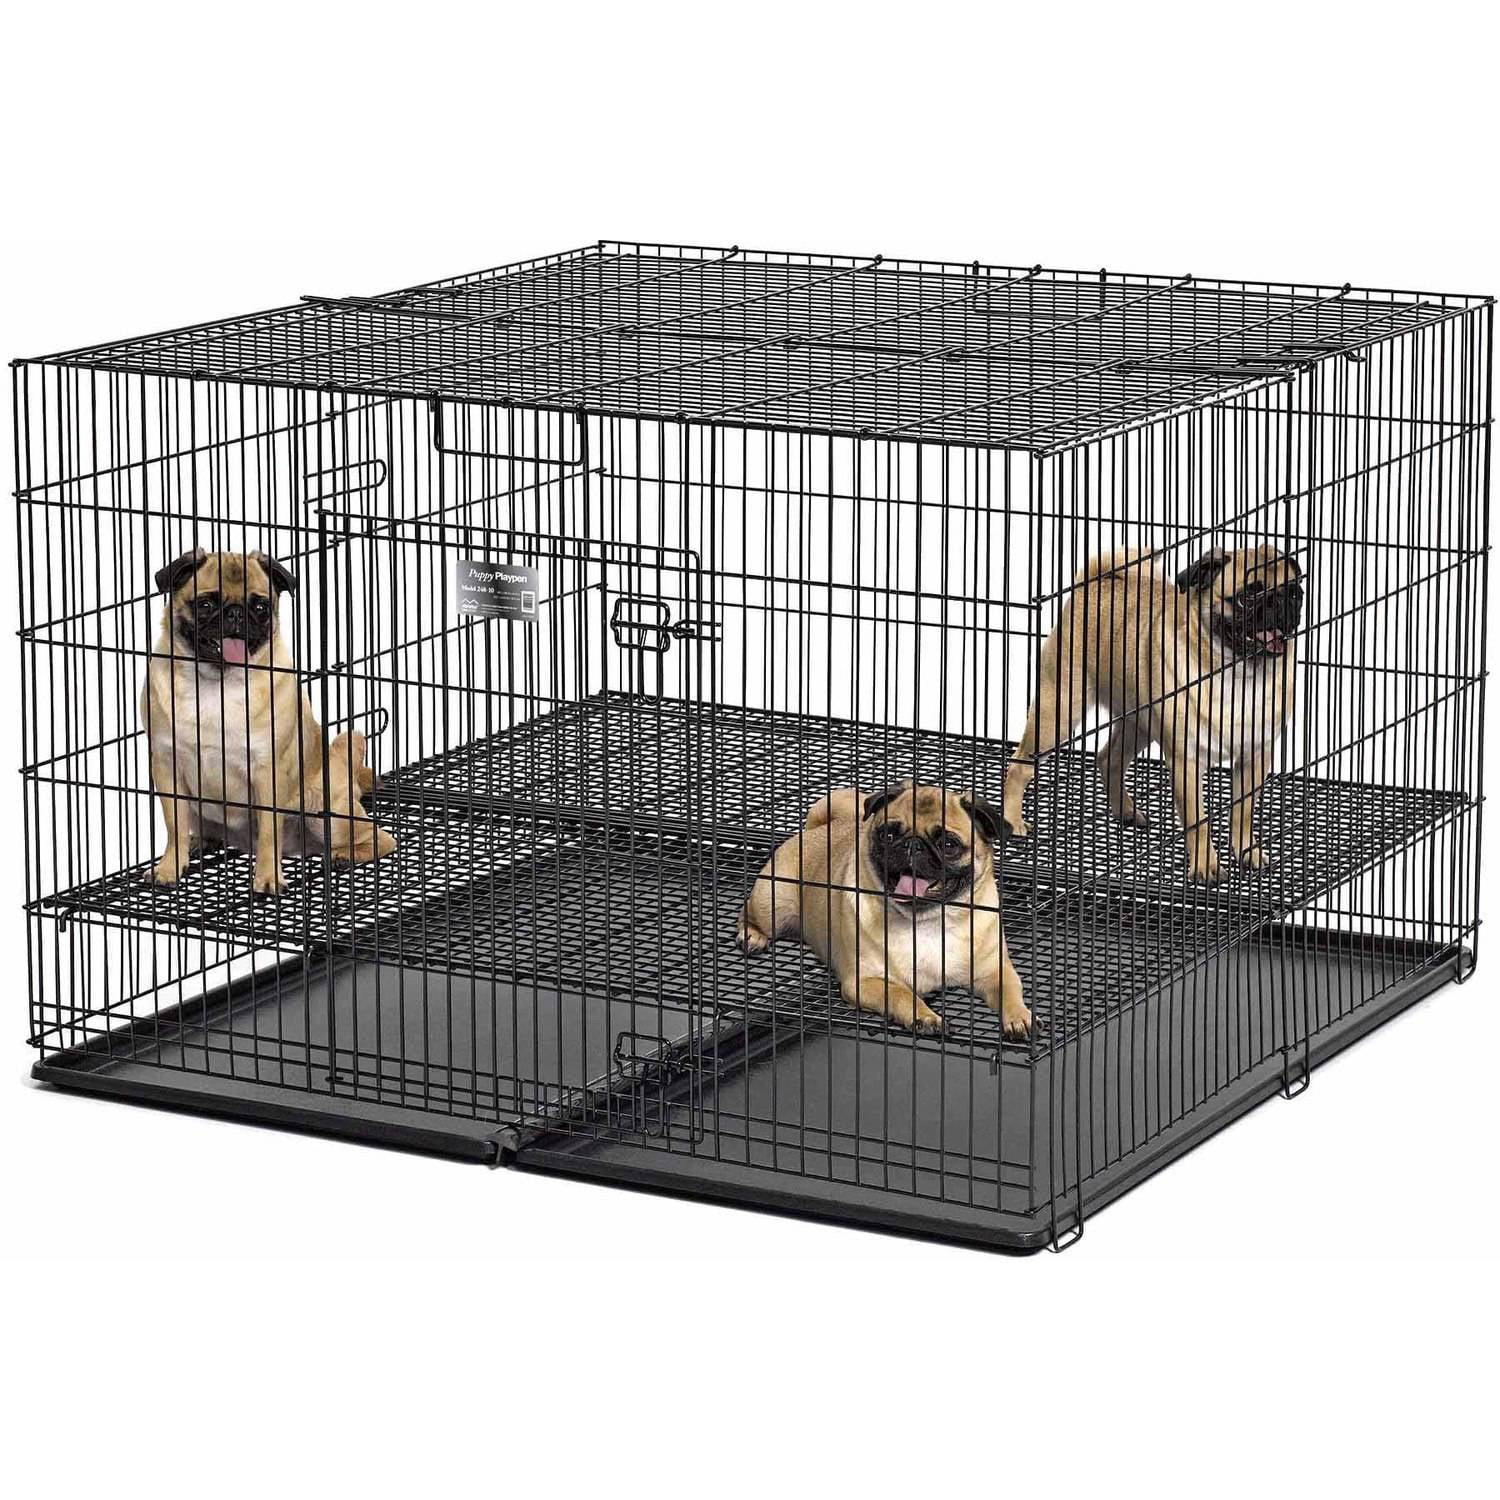 Midwest Puppy Playpen with Plastic Pans and 1/2" Floor